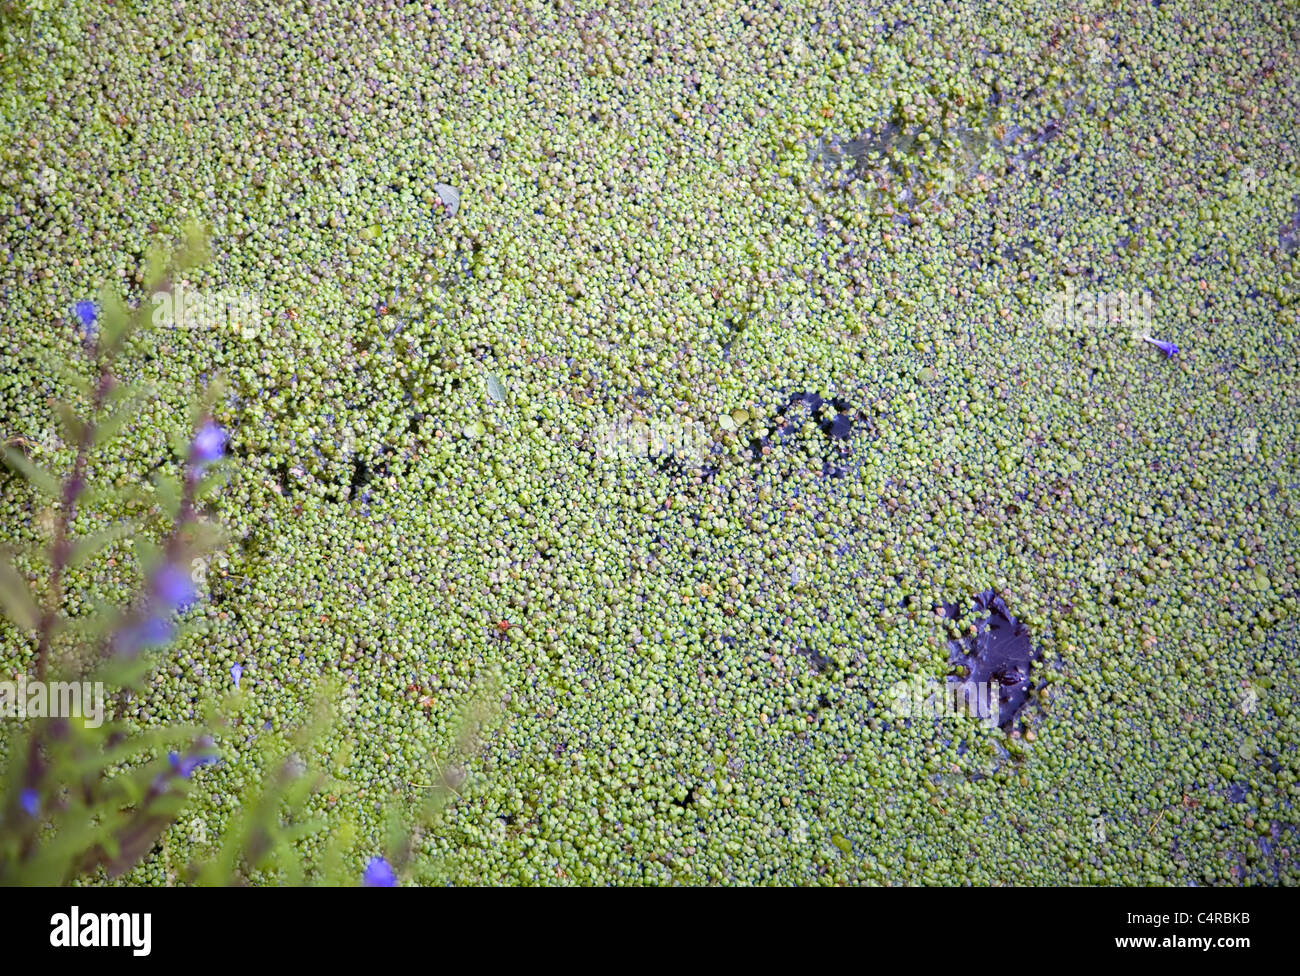 Duckweed on stream in Busy Park Stock Photo